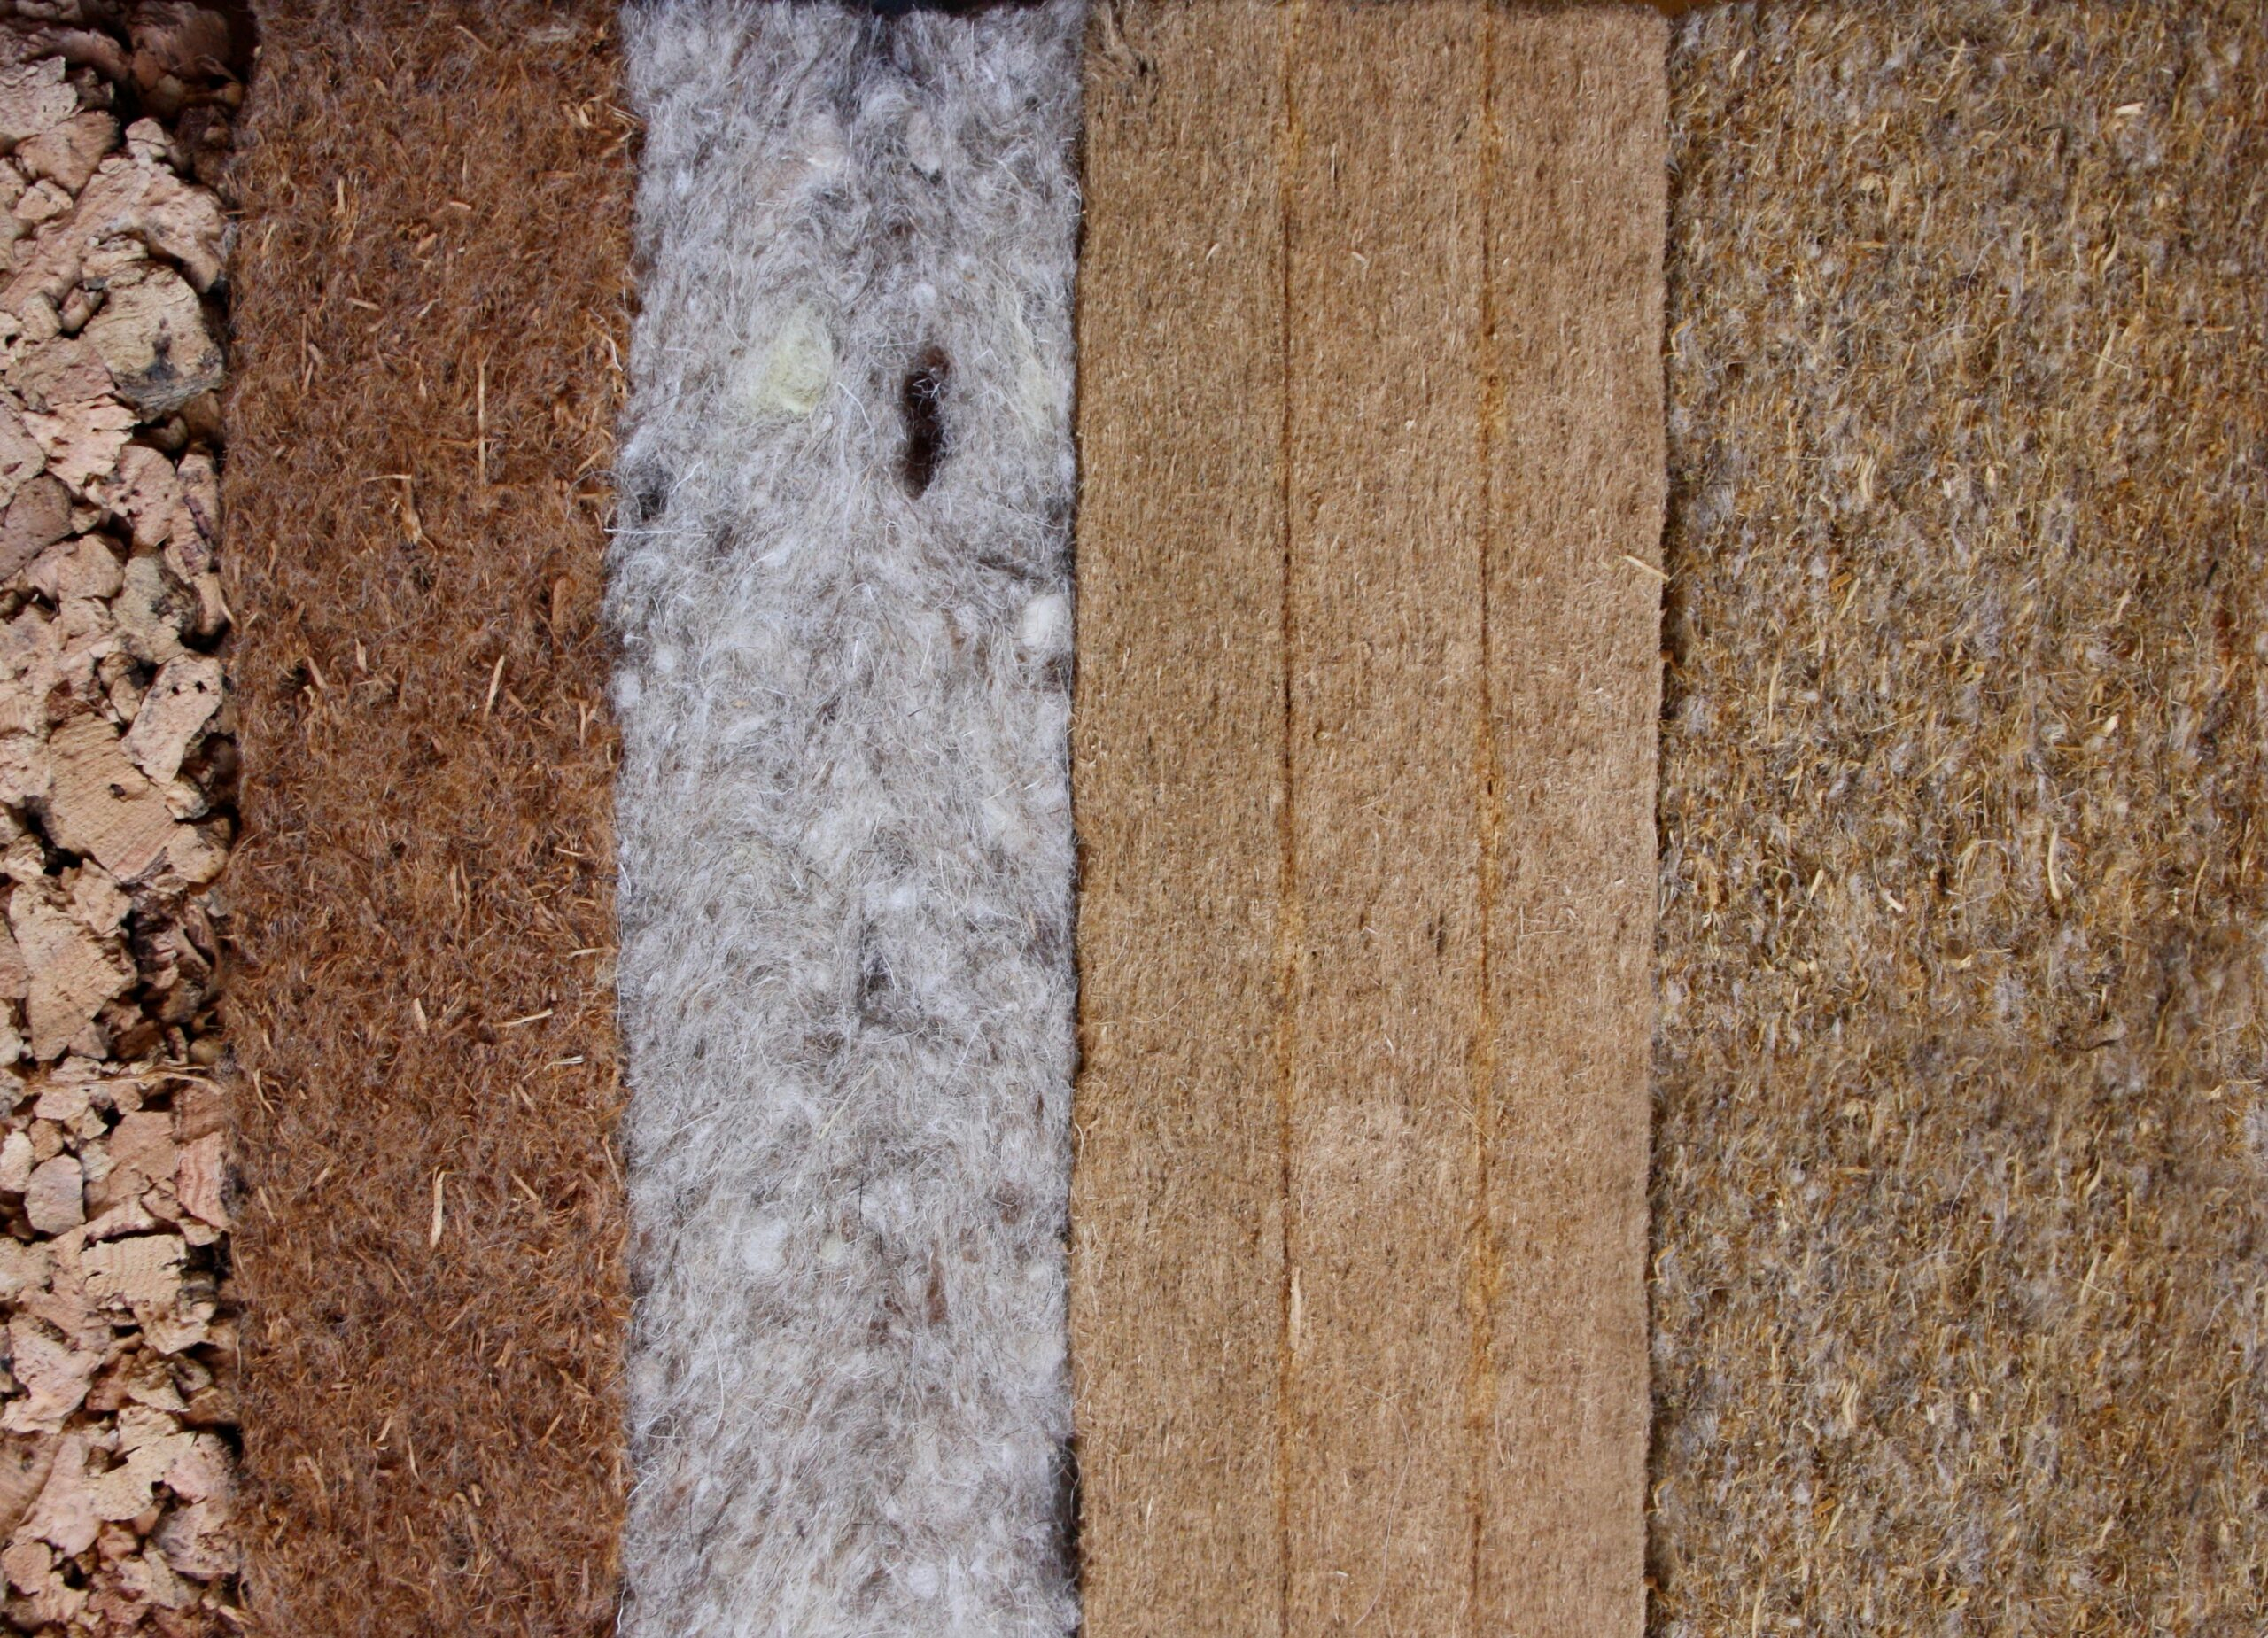 Top view of various types of eco-friendly insulation materials including wool, cotton, and cellulose.